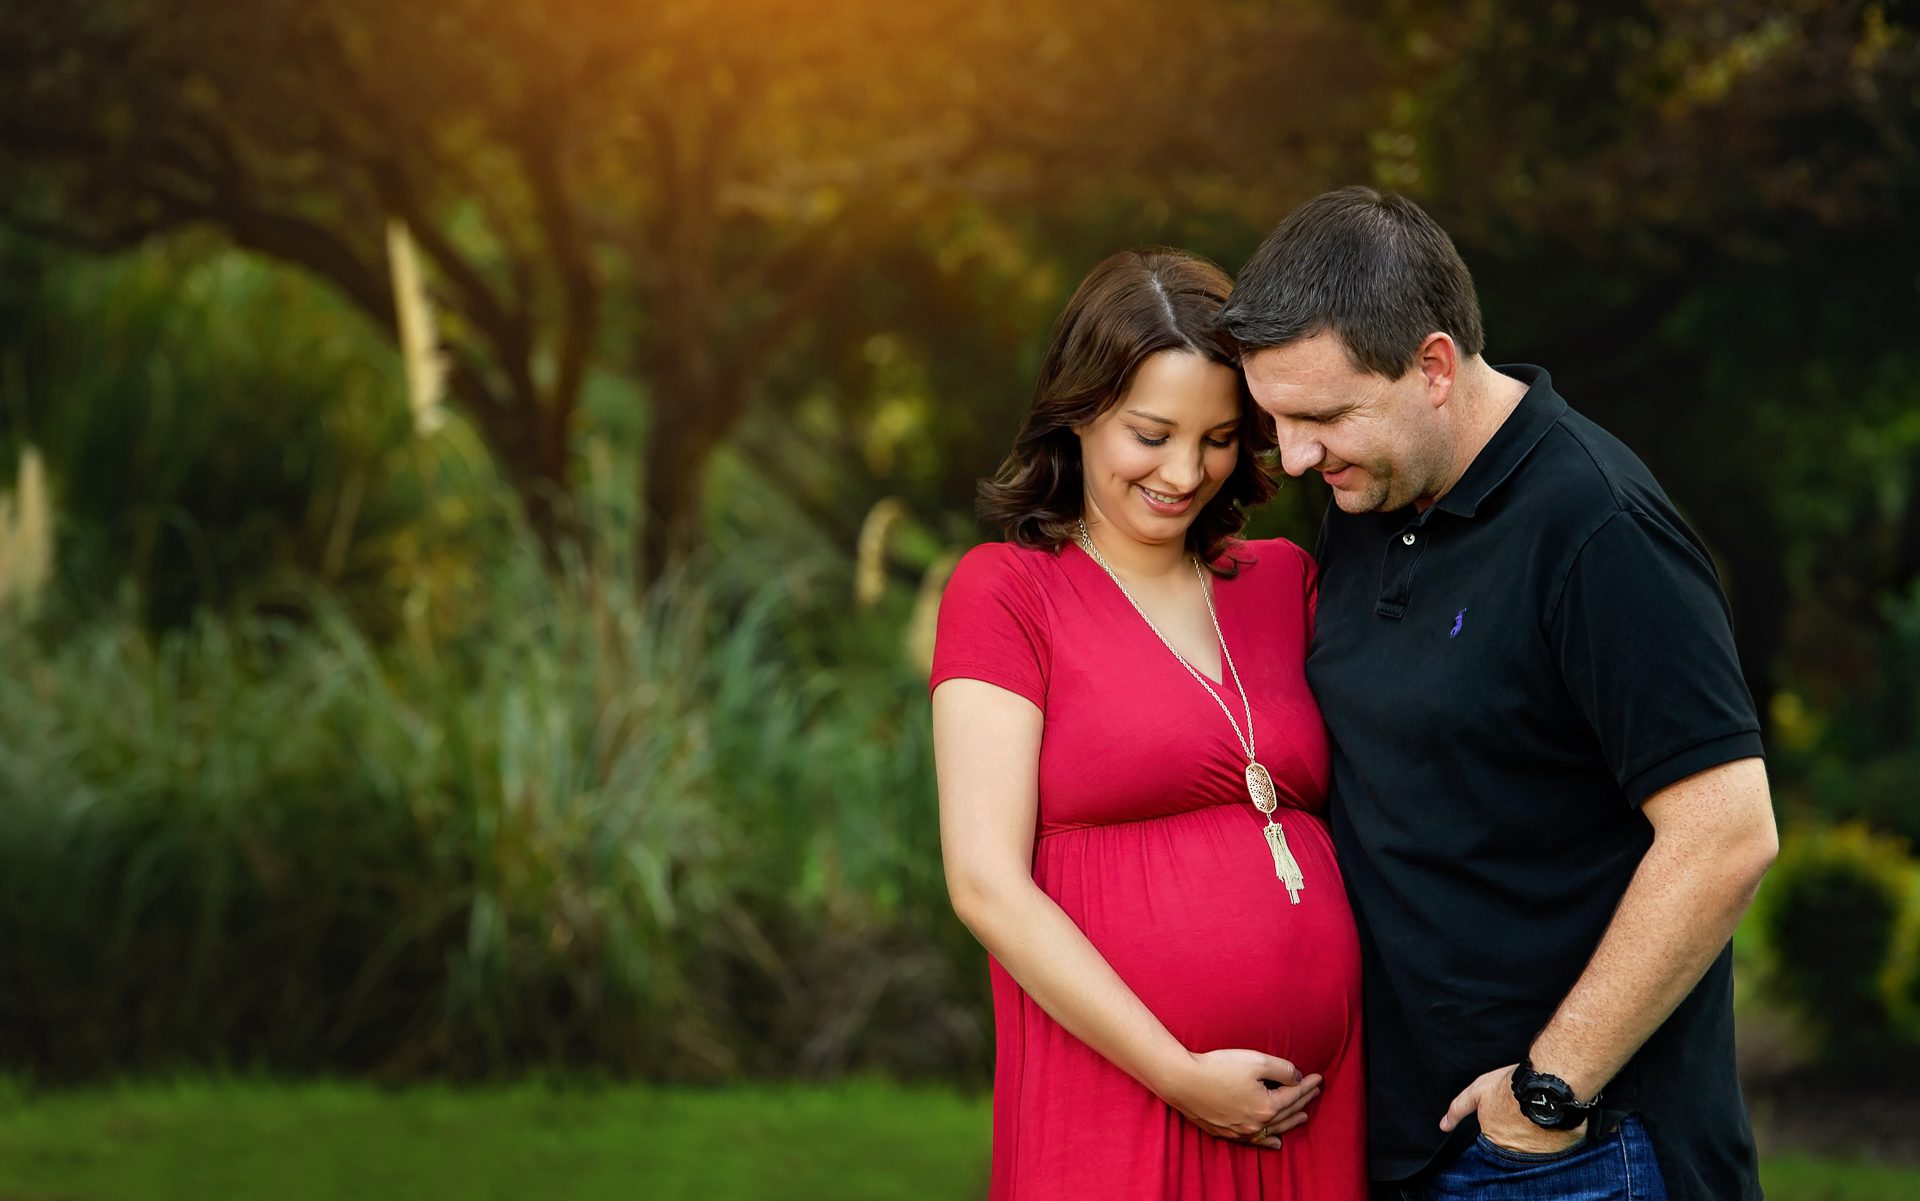 Natalie Roberson maternity photography